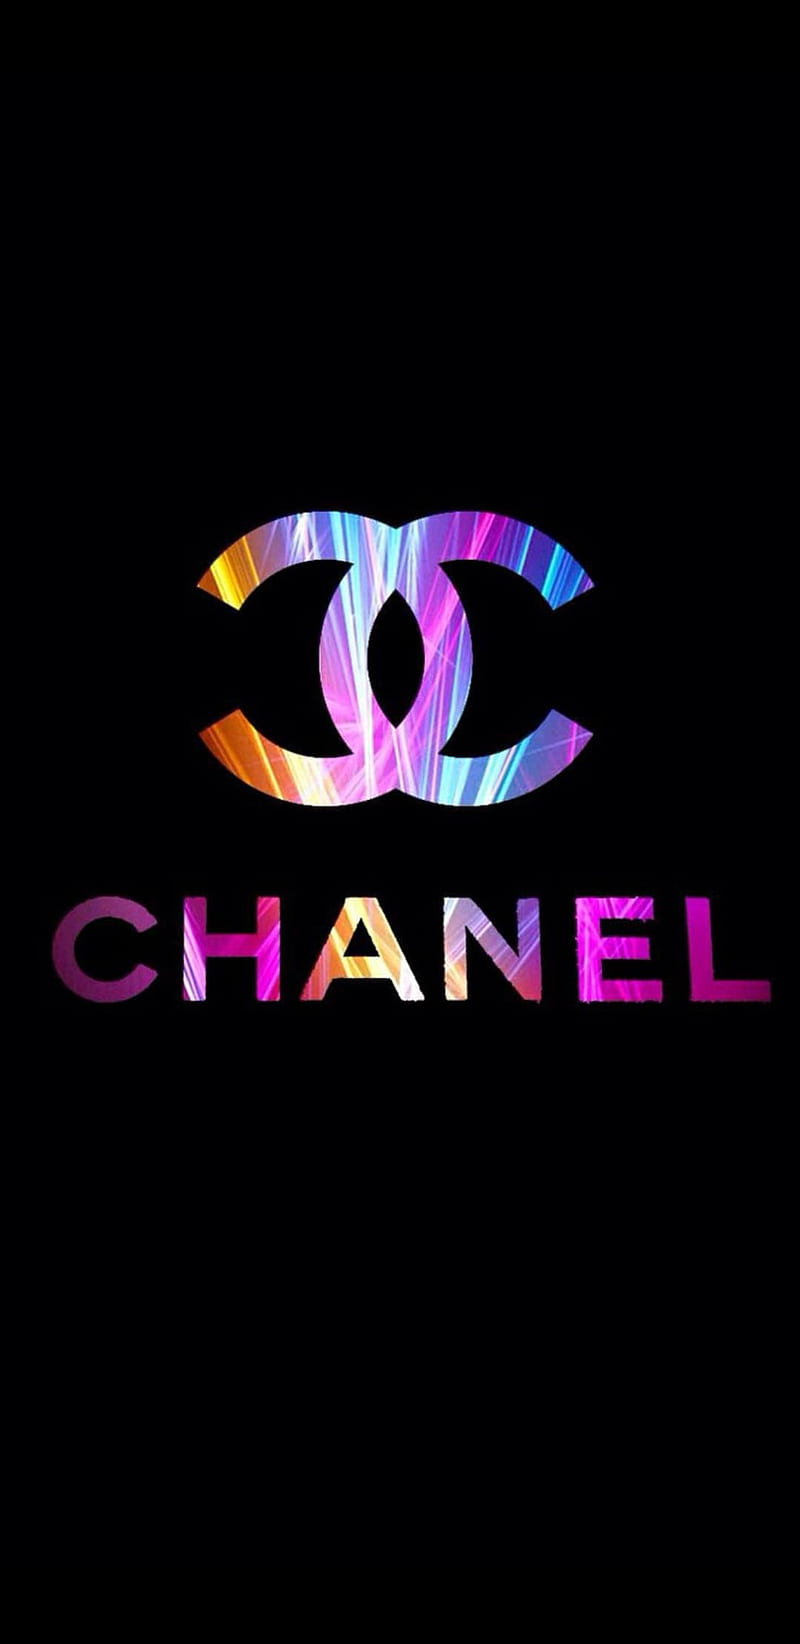 Chanel wallpaper by rainbowrose1993  Download on ZEDGE  dab7